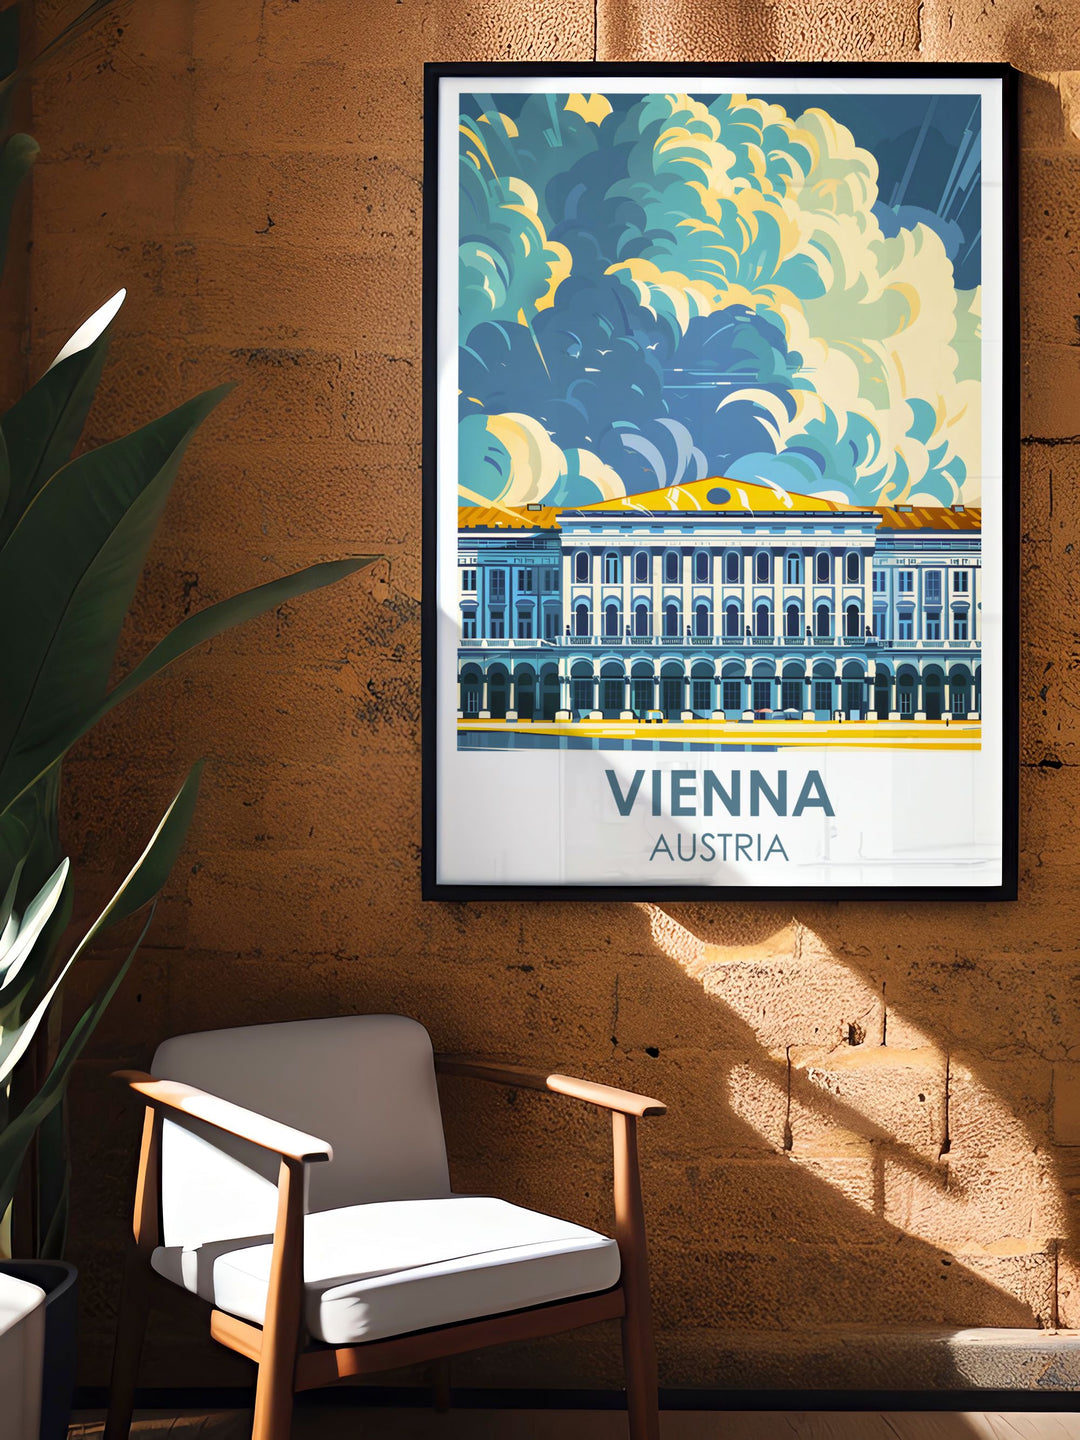 Vienna Artwork of schonbrunn palace capturing the palace's intricate details and expansive gardens a perfect way to bring a piece of Viennas history into your home